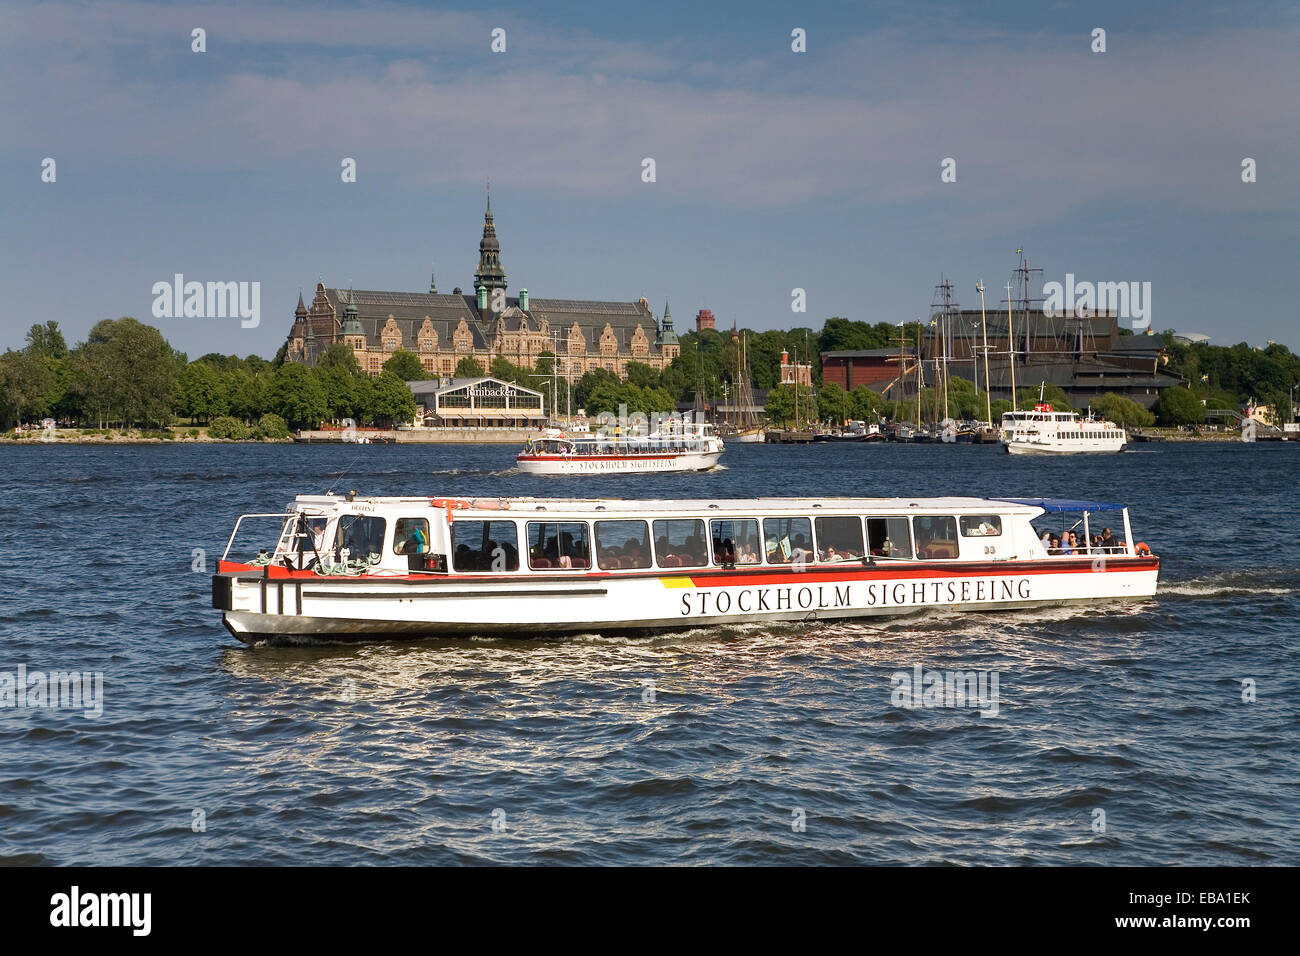 Stockholm Sightseeing boats, Vasa Museum, right, Nordiska Museum, left, Djurgården, Stockholm, Stockholm County, Sweden Stock Photo